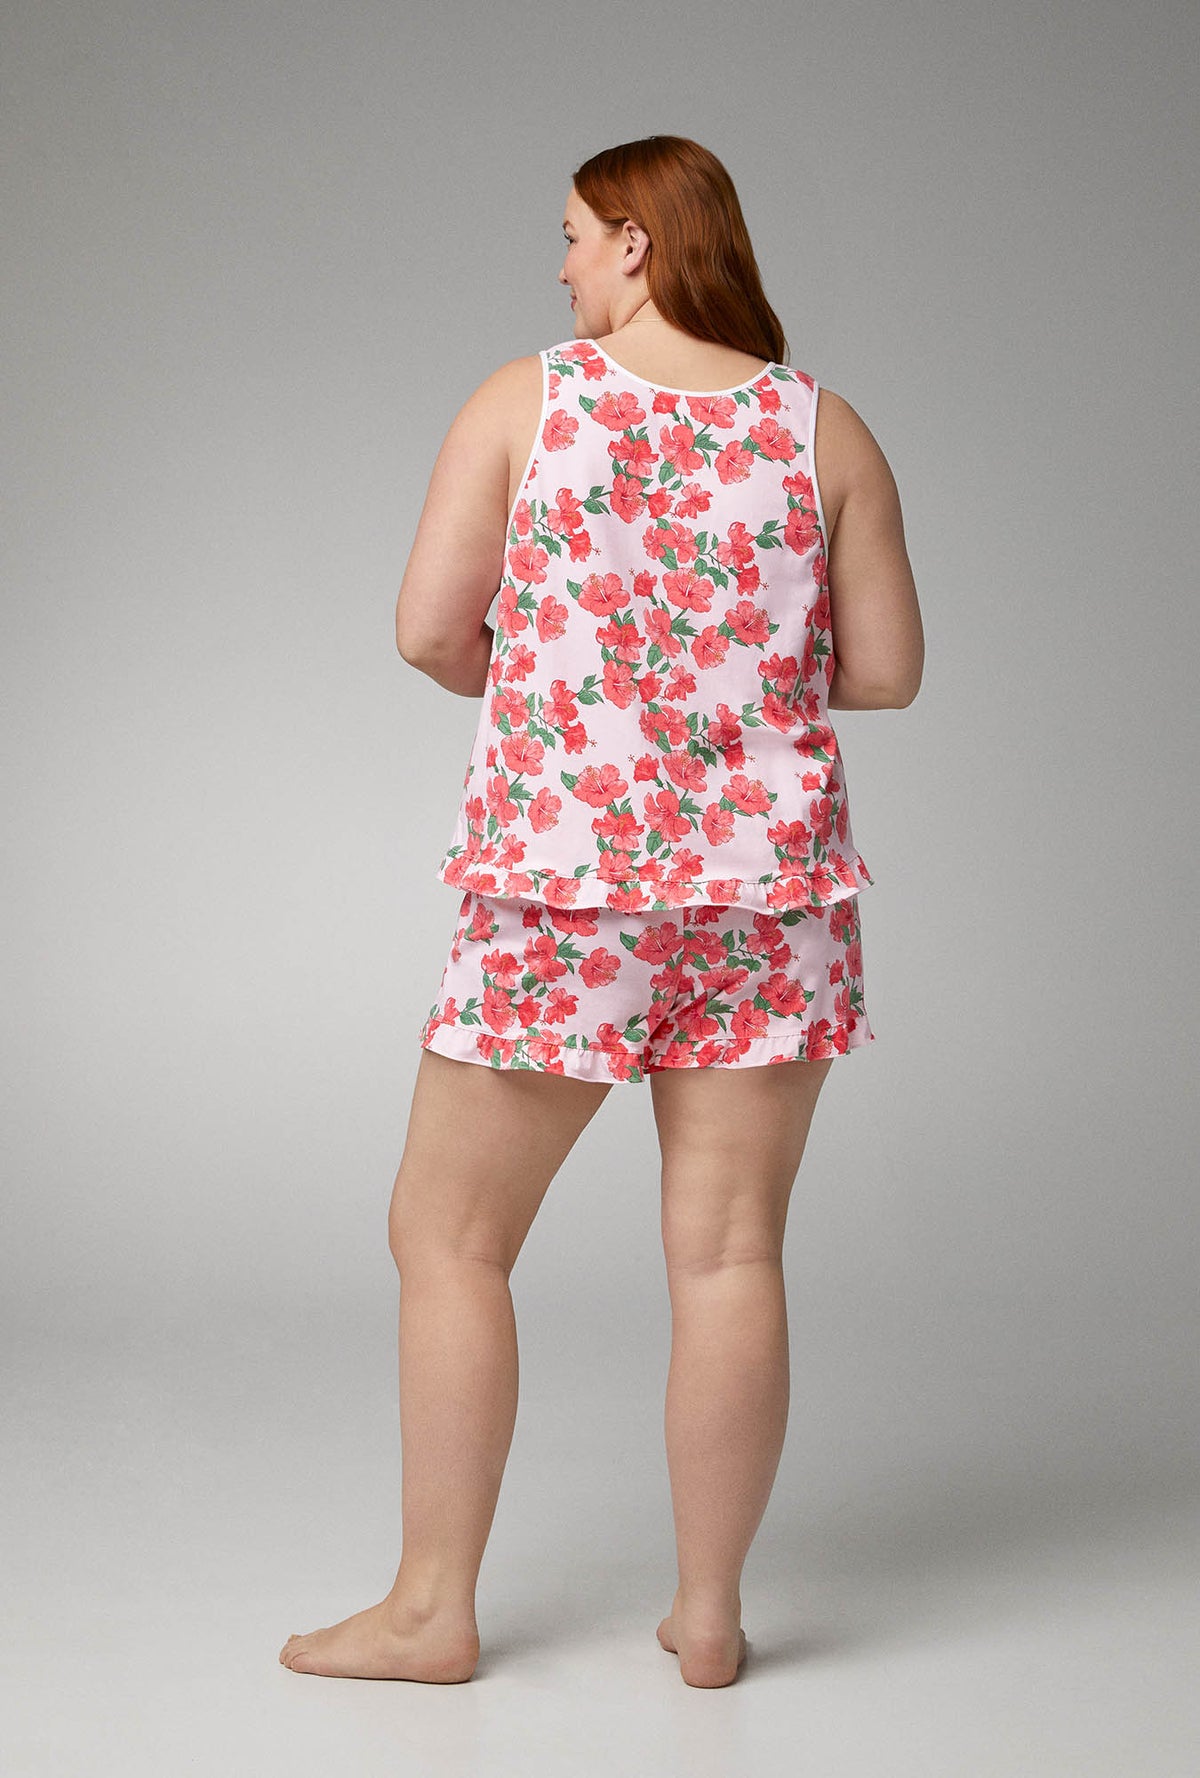 A lady wearing Ruffle Tank Shorty Stretch Jersey PJ Set with Sweet Hibiscus print